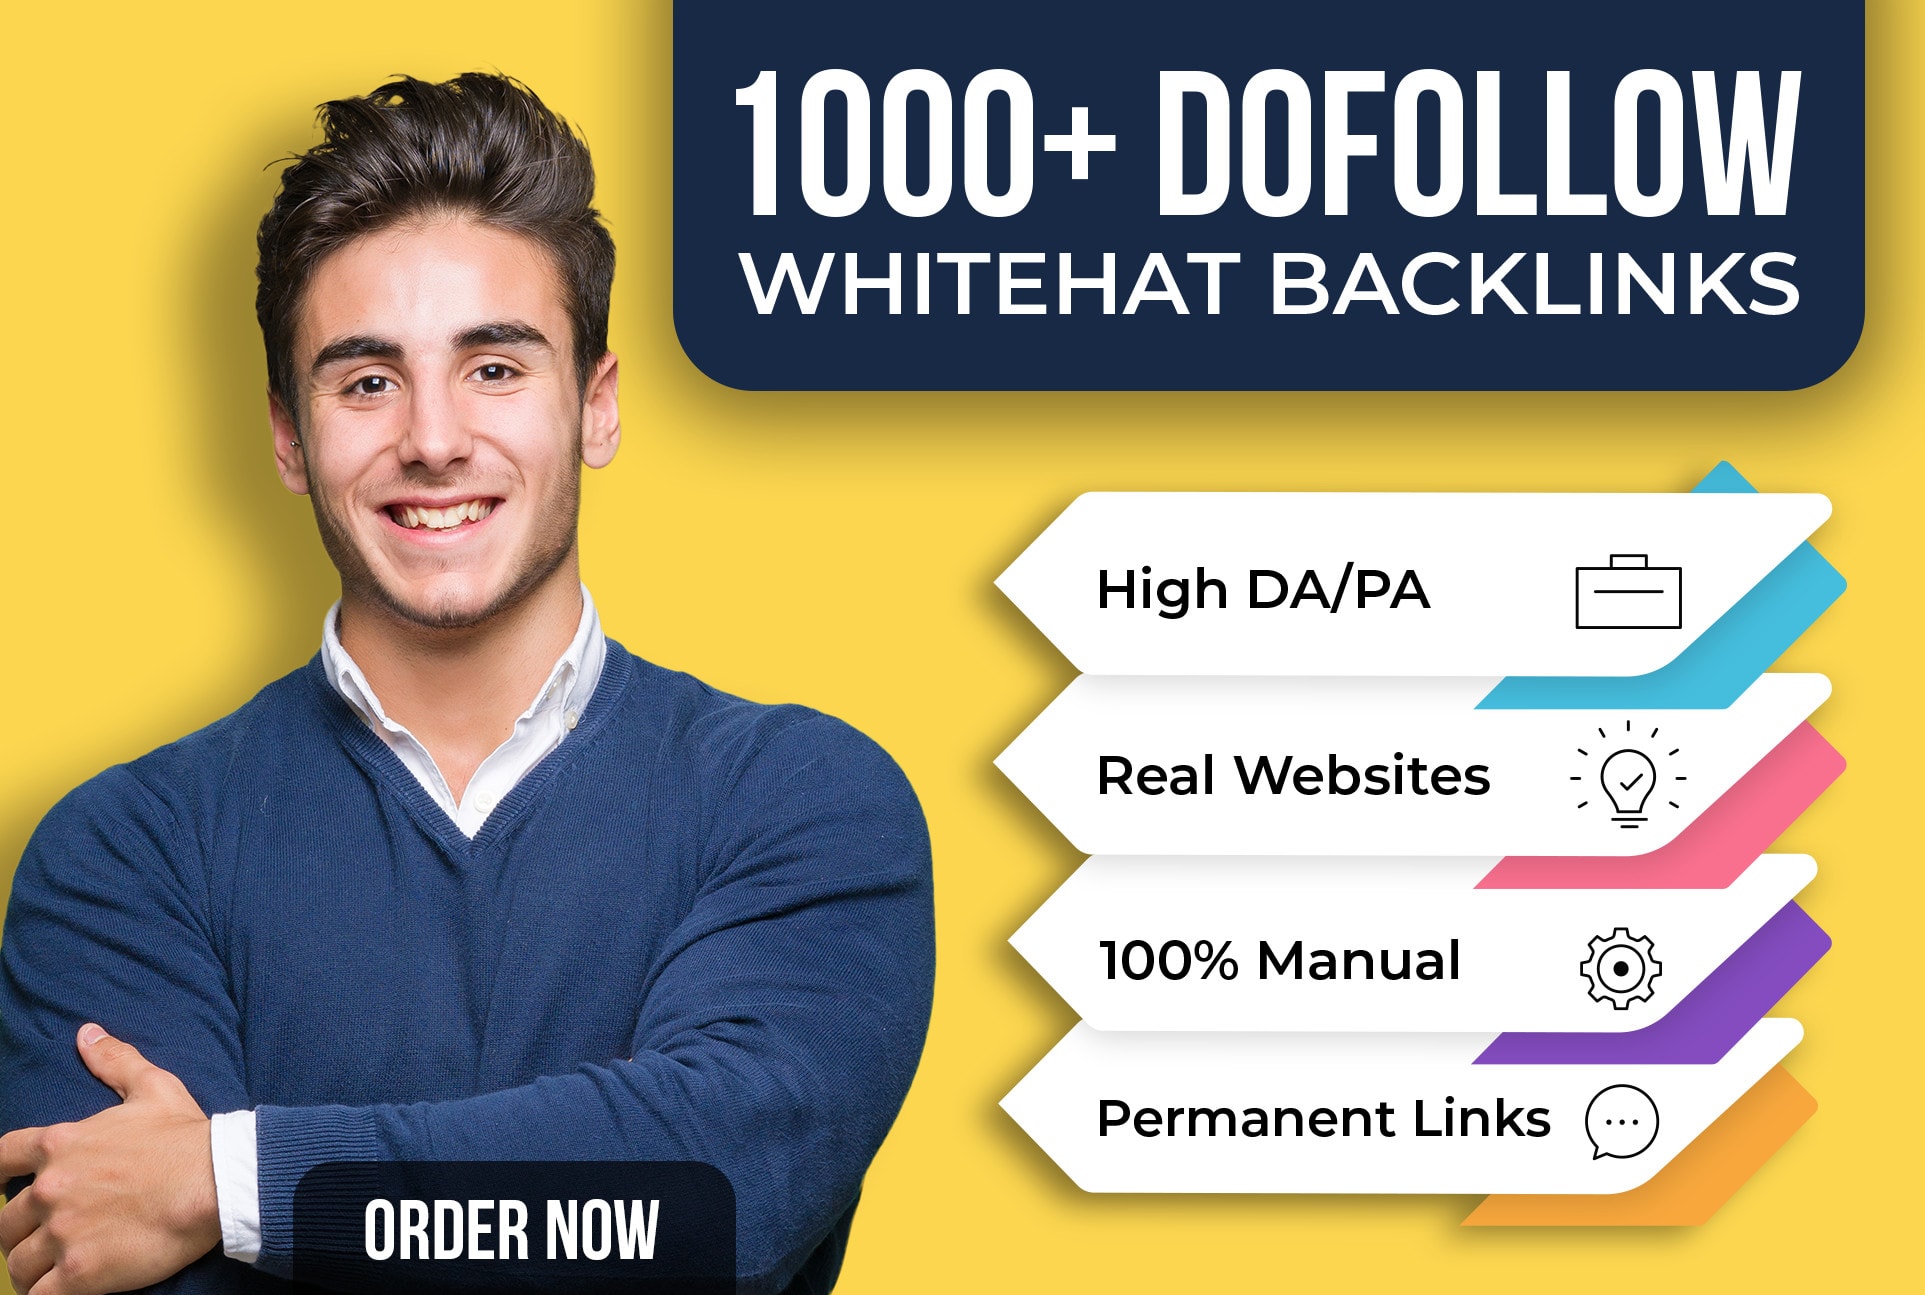 23968build SEO dofollow backlinks high quality contextual white hat link building